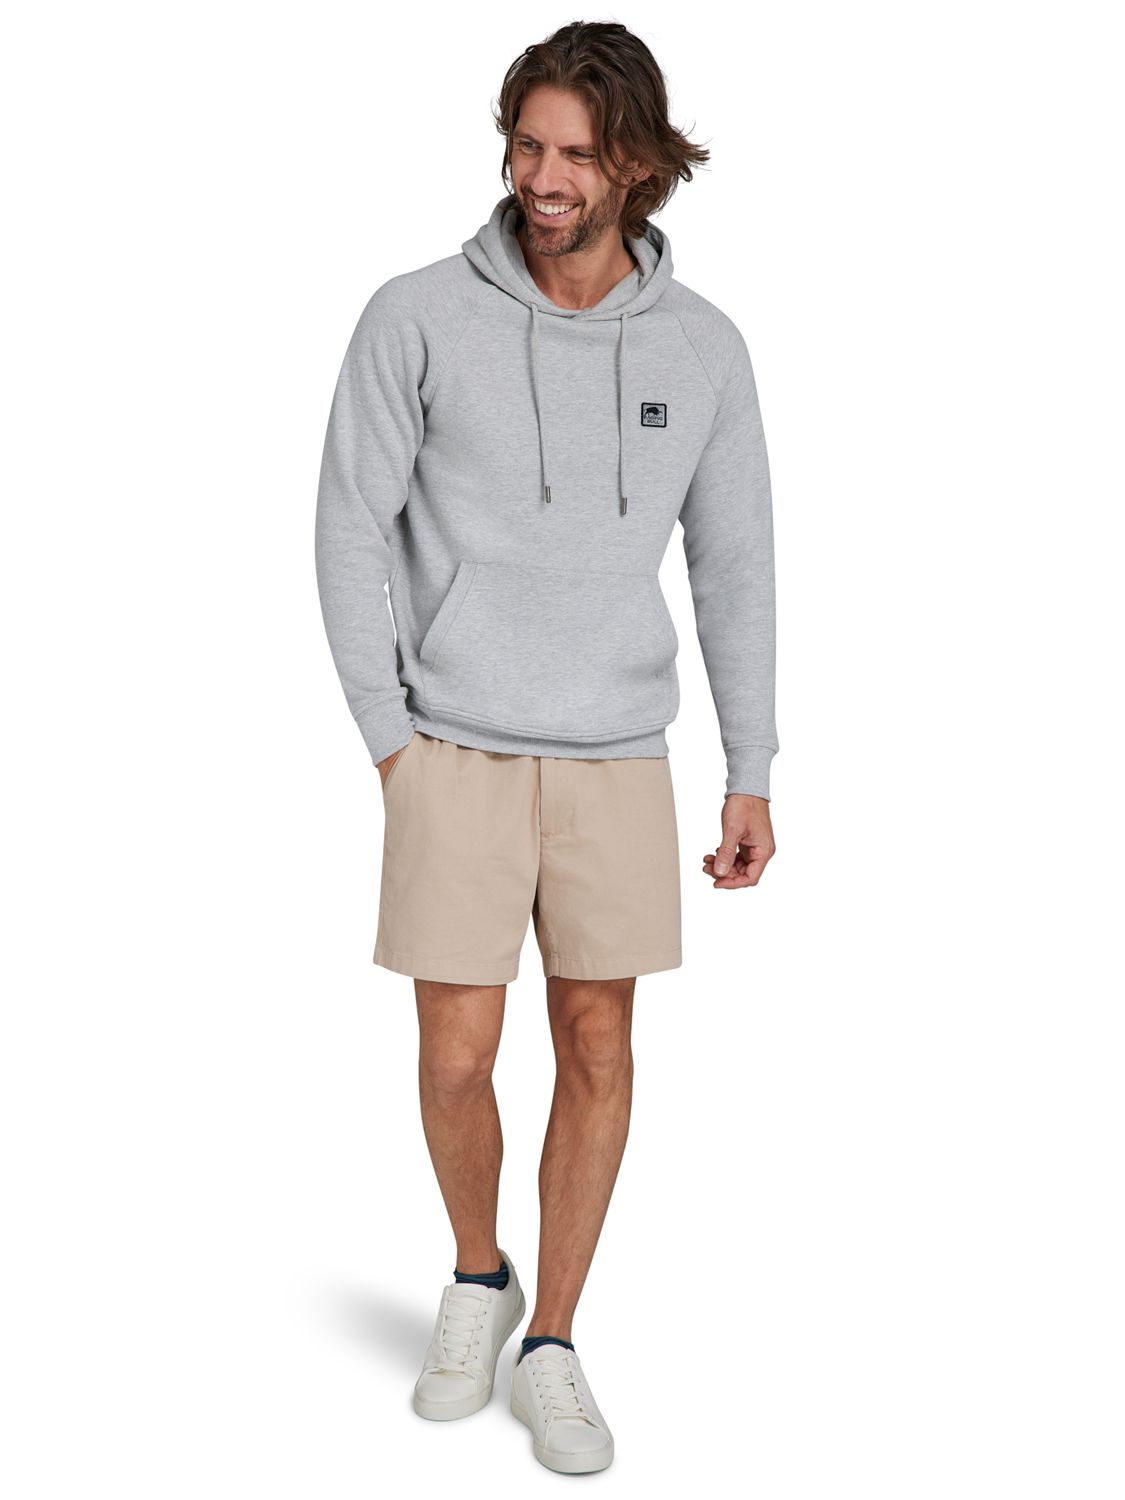 Raging Bull Classic Woven Patch Overhead Hoodie, Grey Marl, M